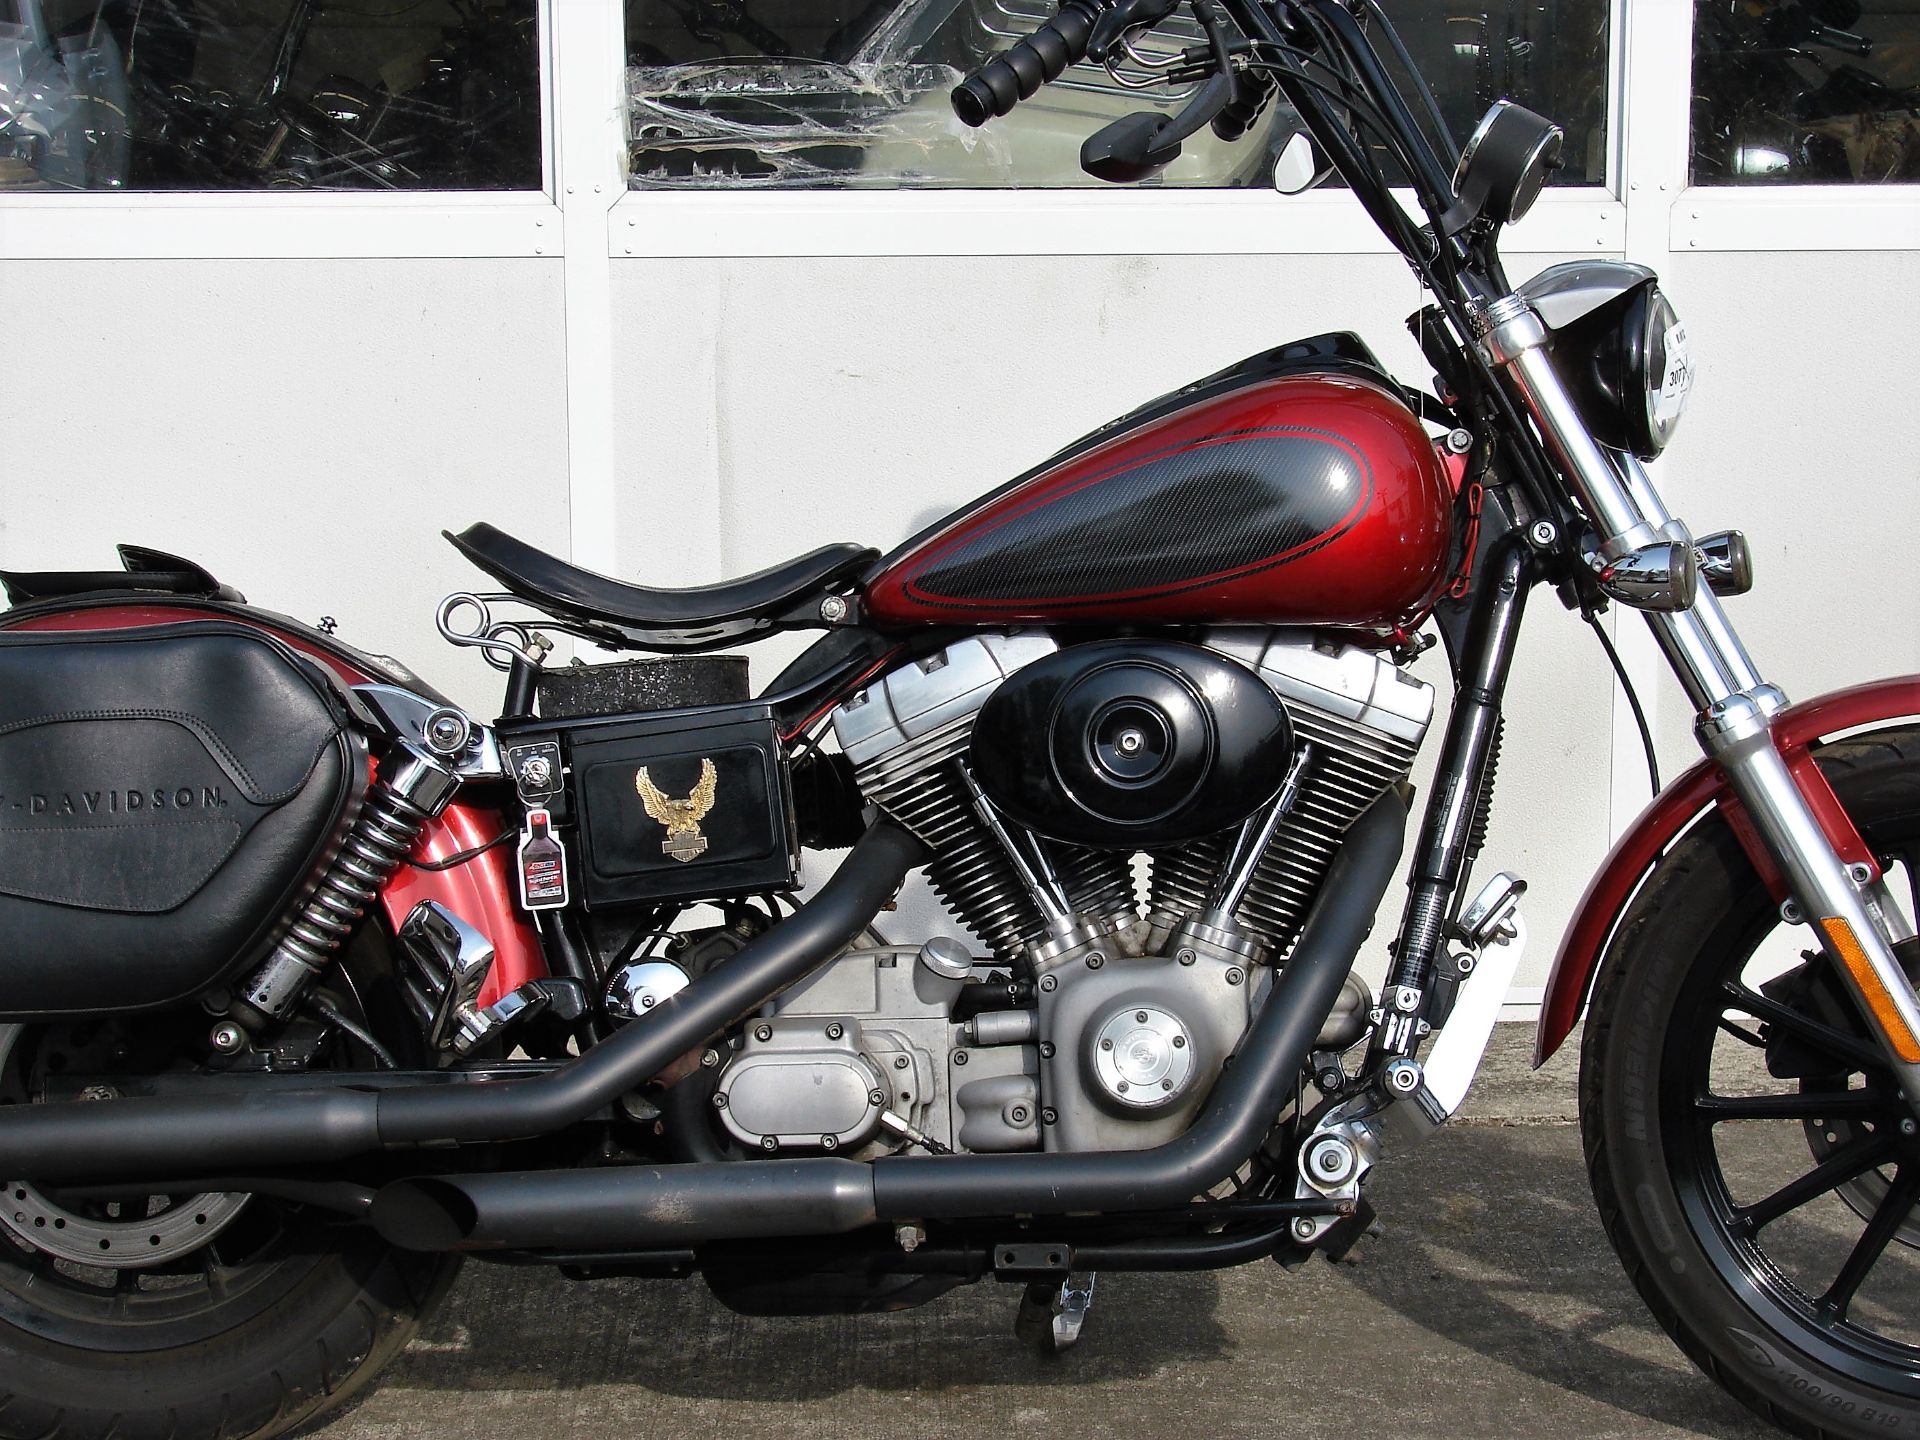 Used 2005 Harley Davidson Fxd Dyna Super Glide Motorcycles In Williamstown Nj 4 28 21 01 Red W Slate Gray